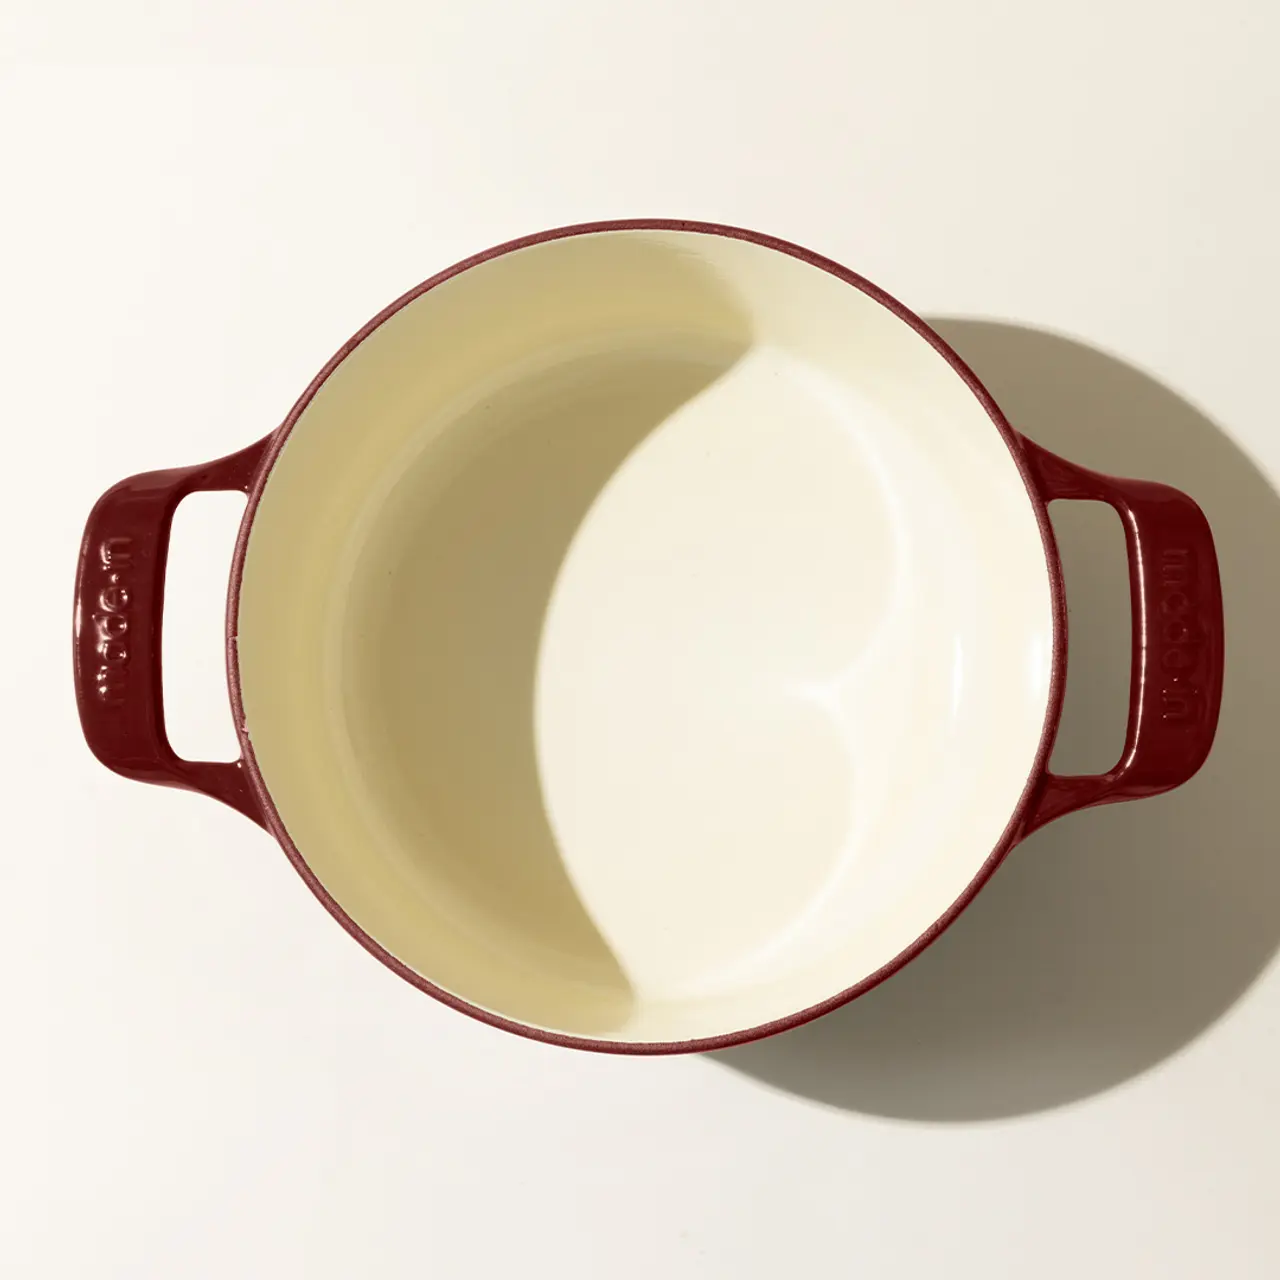 An empty round red ceramic Dutch oven with side handles and a cream interior viewed from above.